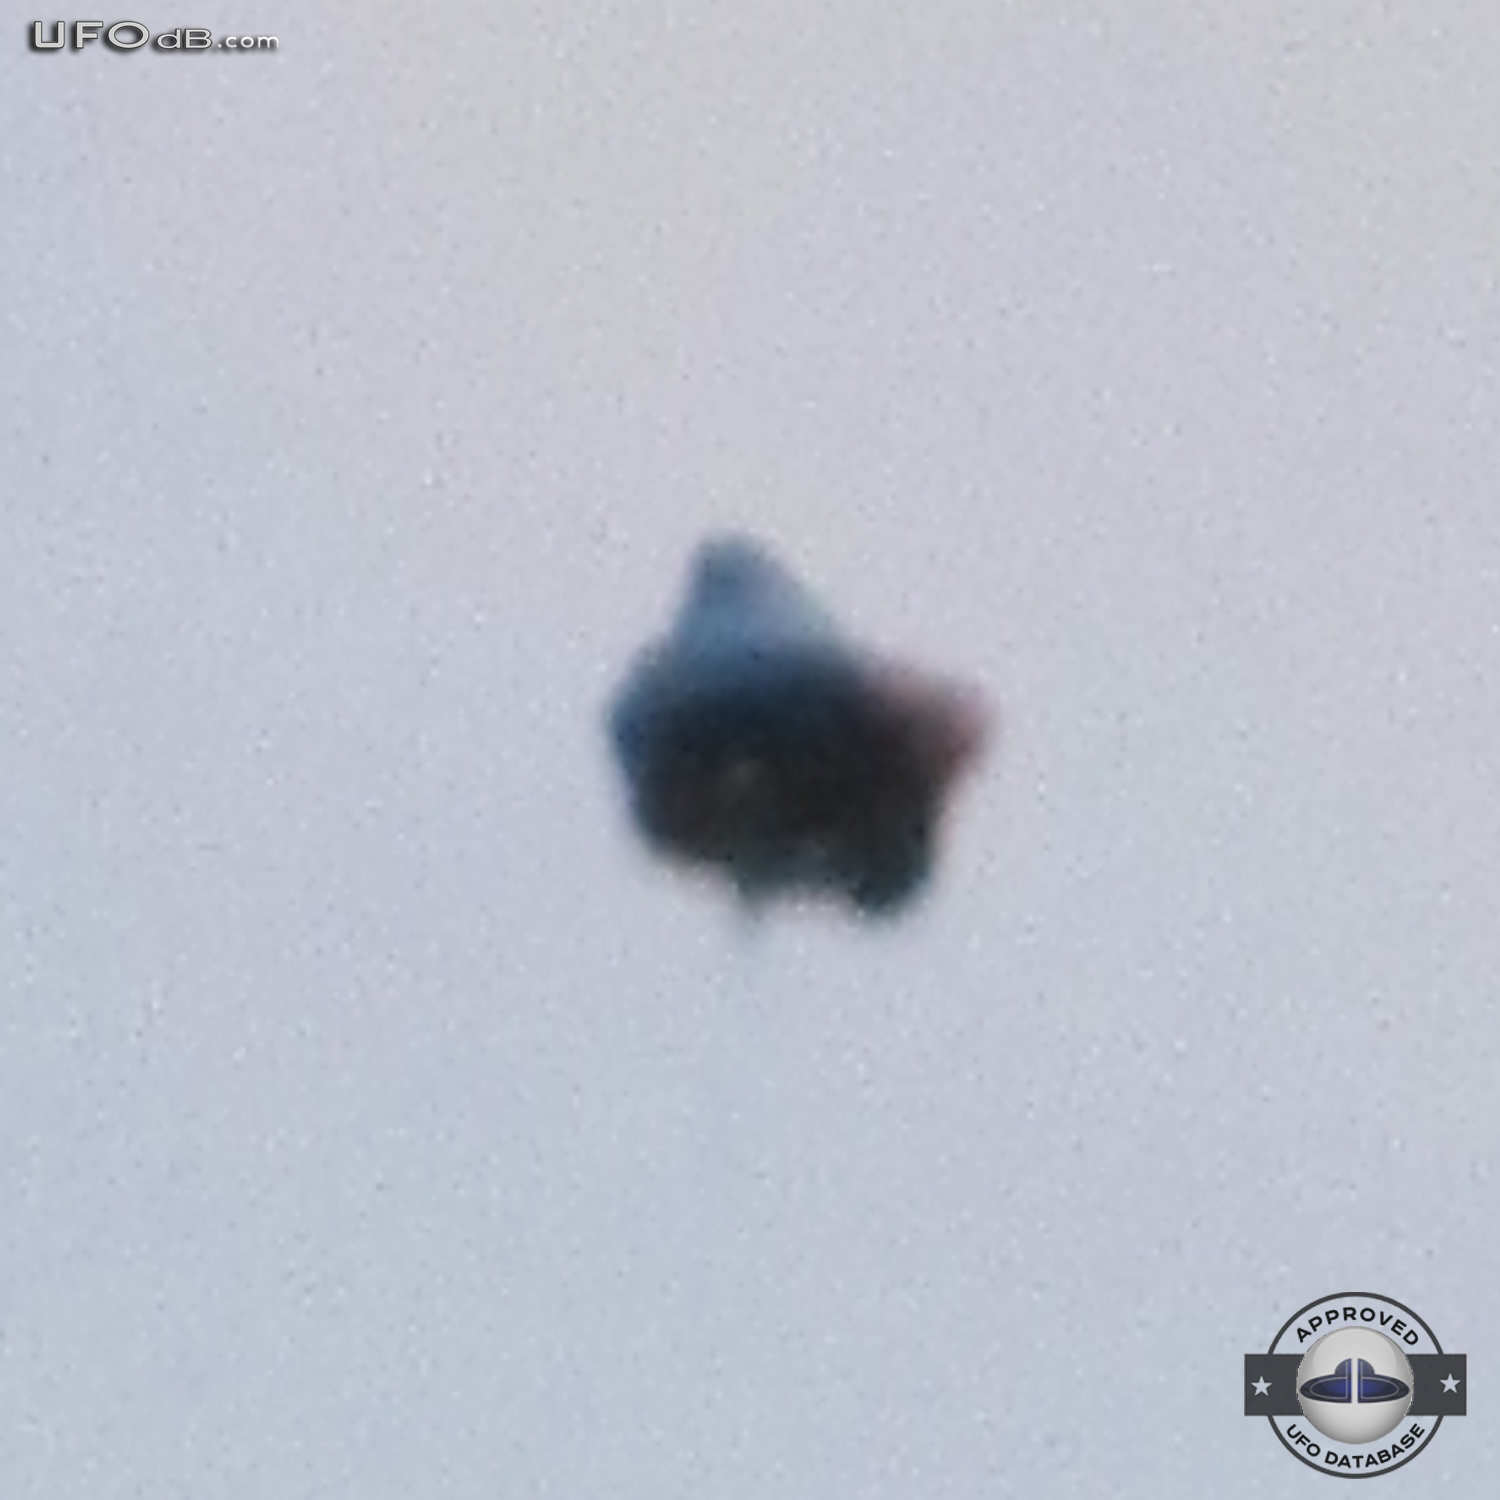 A Massachusetts citizen get a picture of UFO the size of a Basketball UFO Picture #365-2